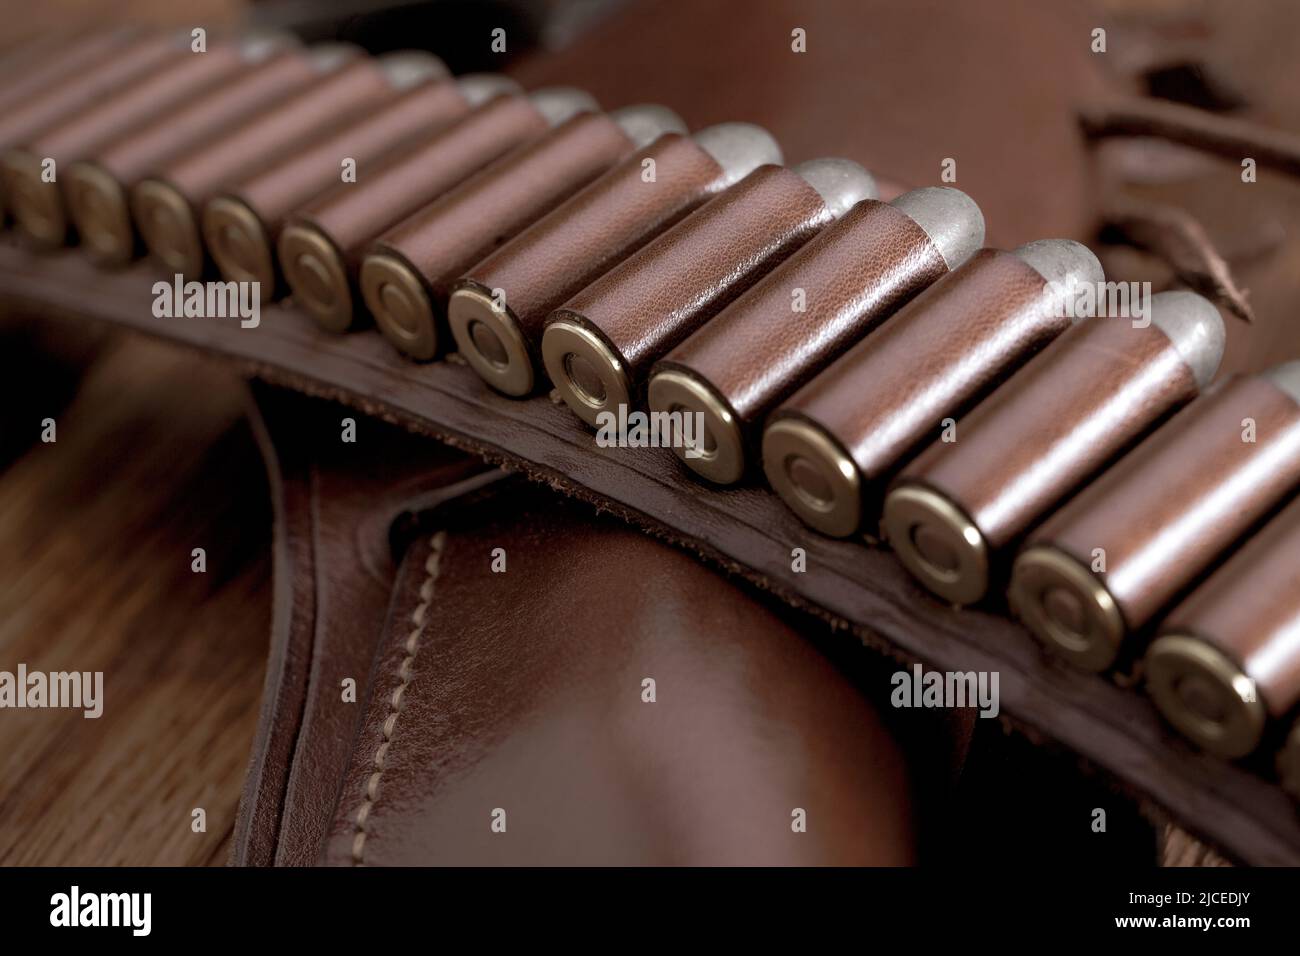 Leather gun belt with ammnunitions and revolver in holster on wooden table Stock Photo